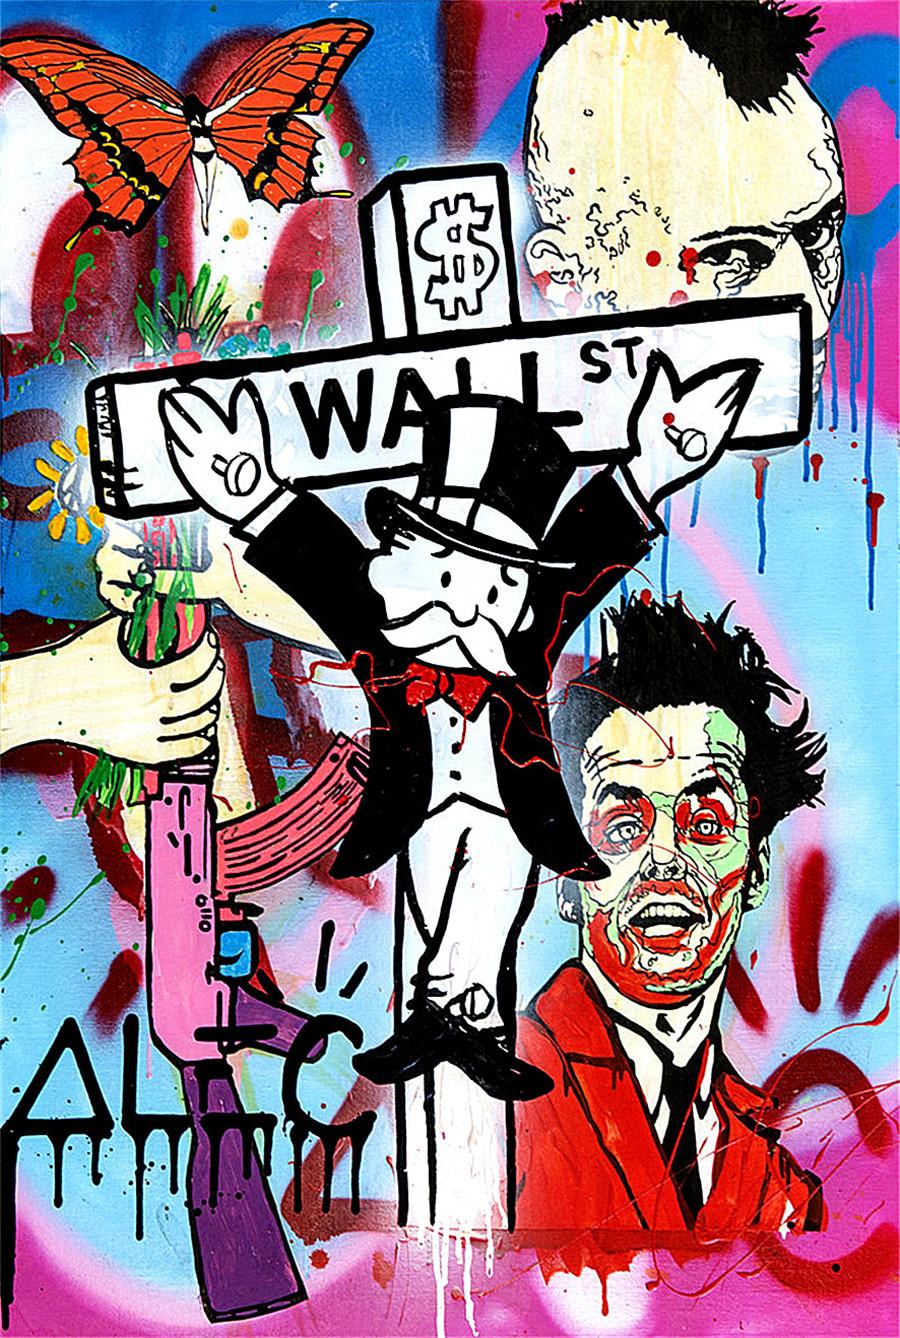 Alec Monopoly The Most Bankable Street Artist Right Now The Milliardaire